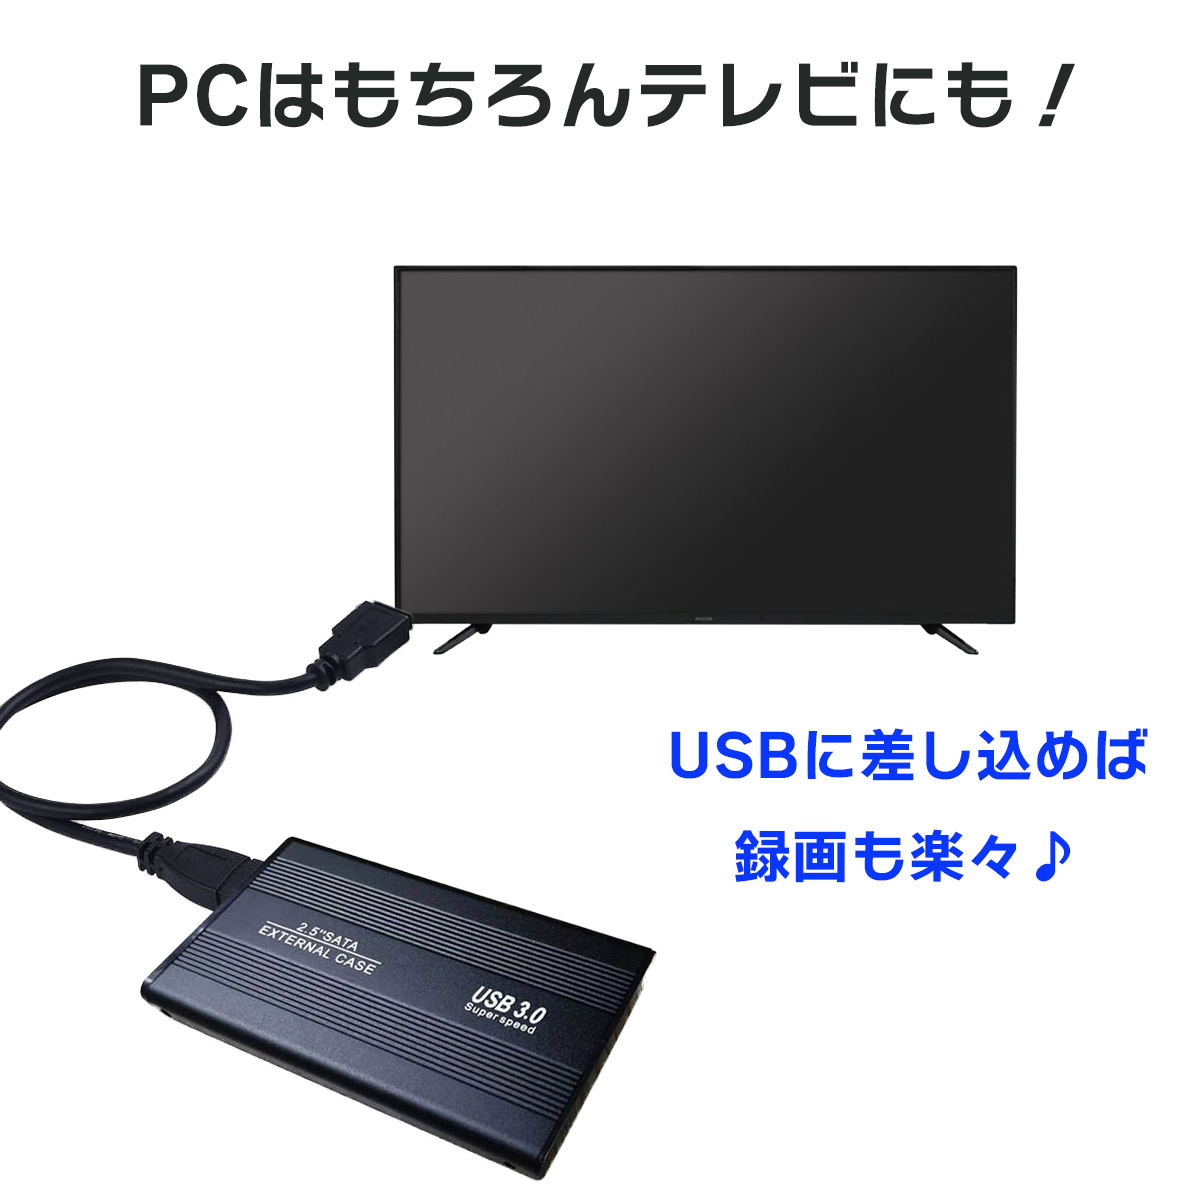  attached outside hard disk case laptop hard disk HDD SSD 2.5 -inch desk top tv video recording SATA Serial ATA USB3.0 specification 